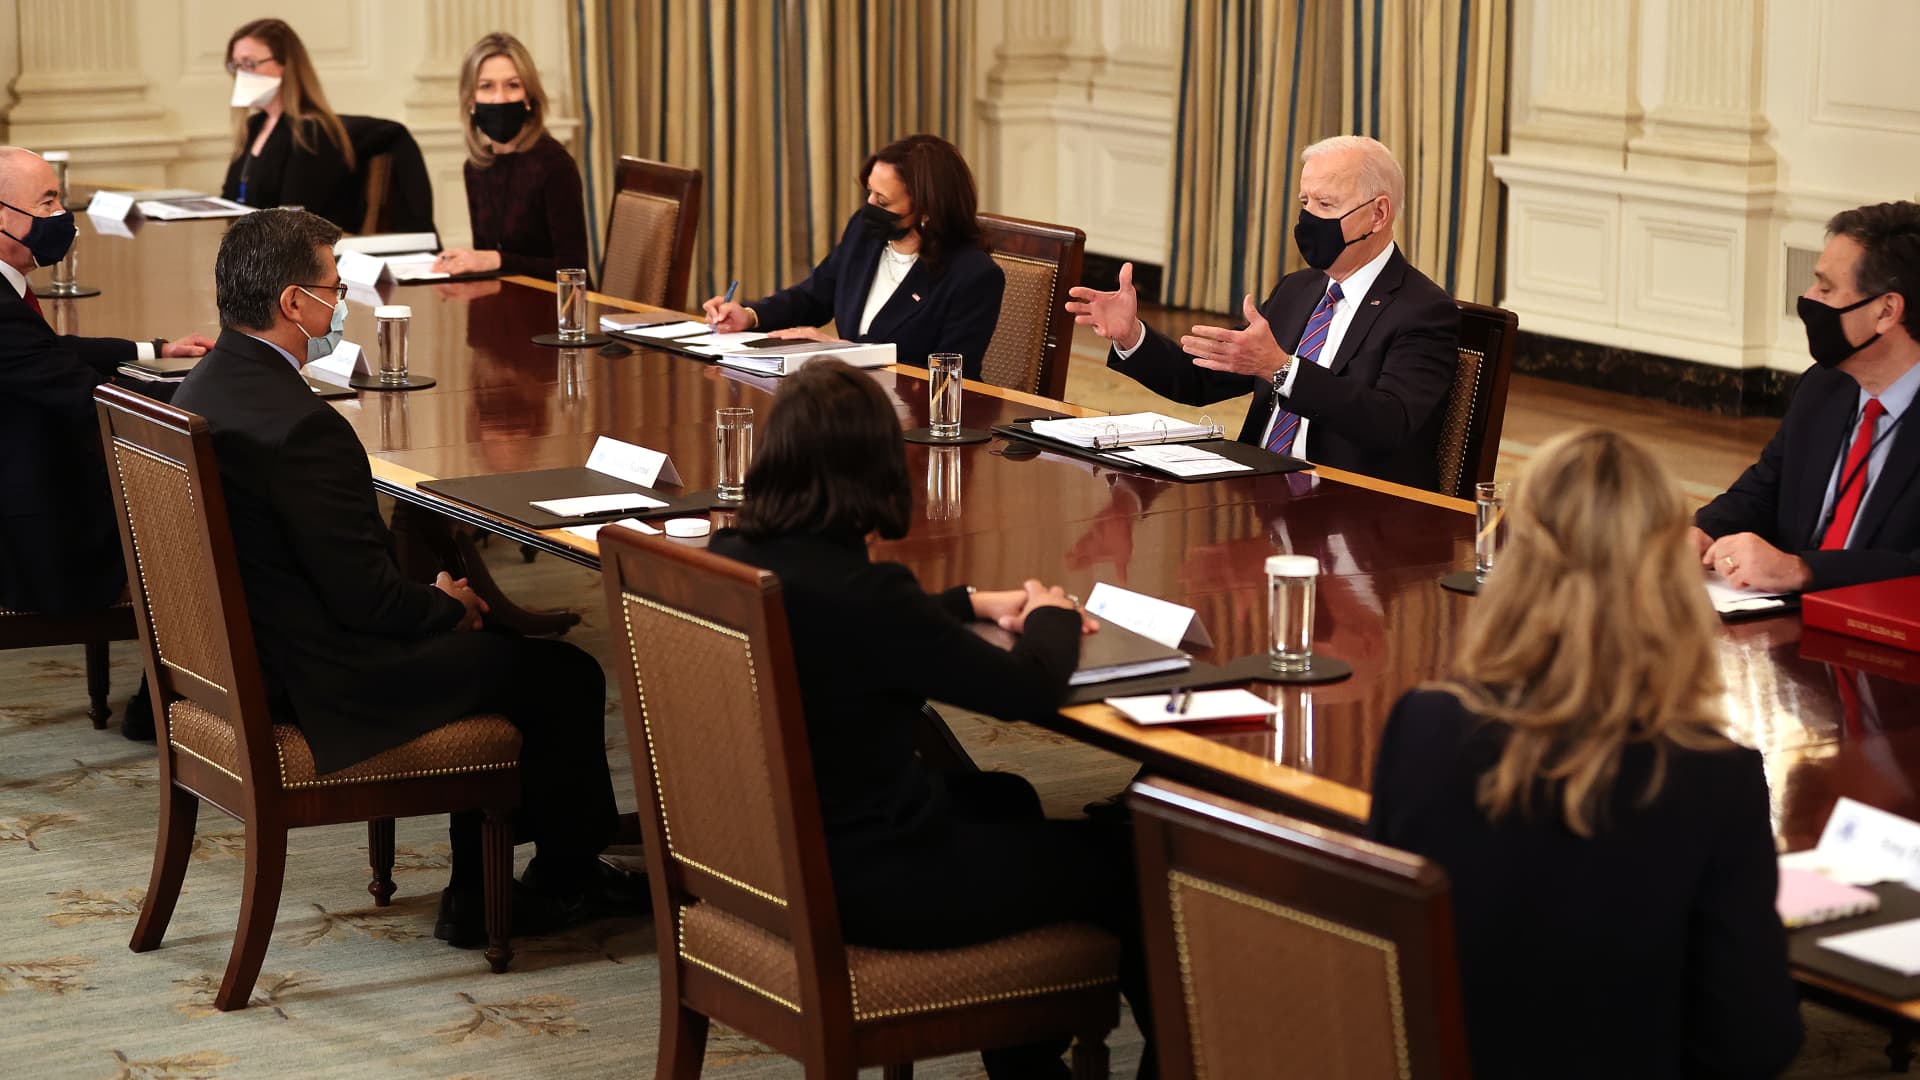 President Joe Biden and Vice President Kamala Harris meet with Cabinet members and immigration advisors in the State Dining Room on March 24, 2021 in Washington, DC.